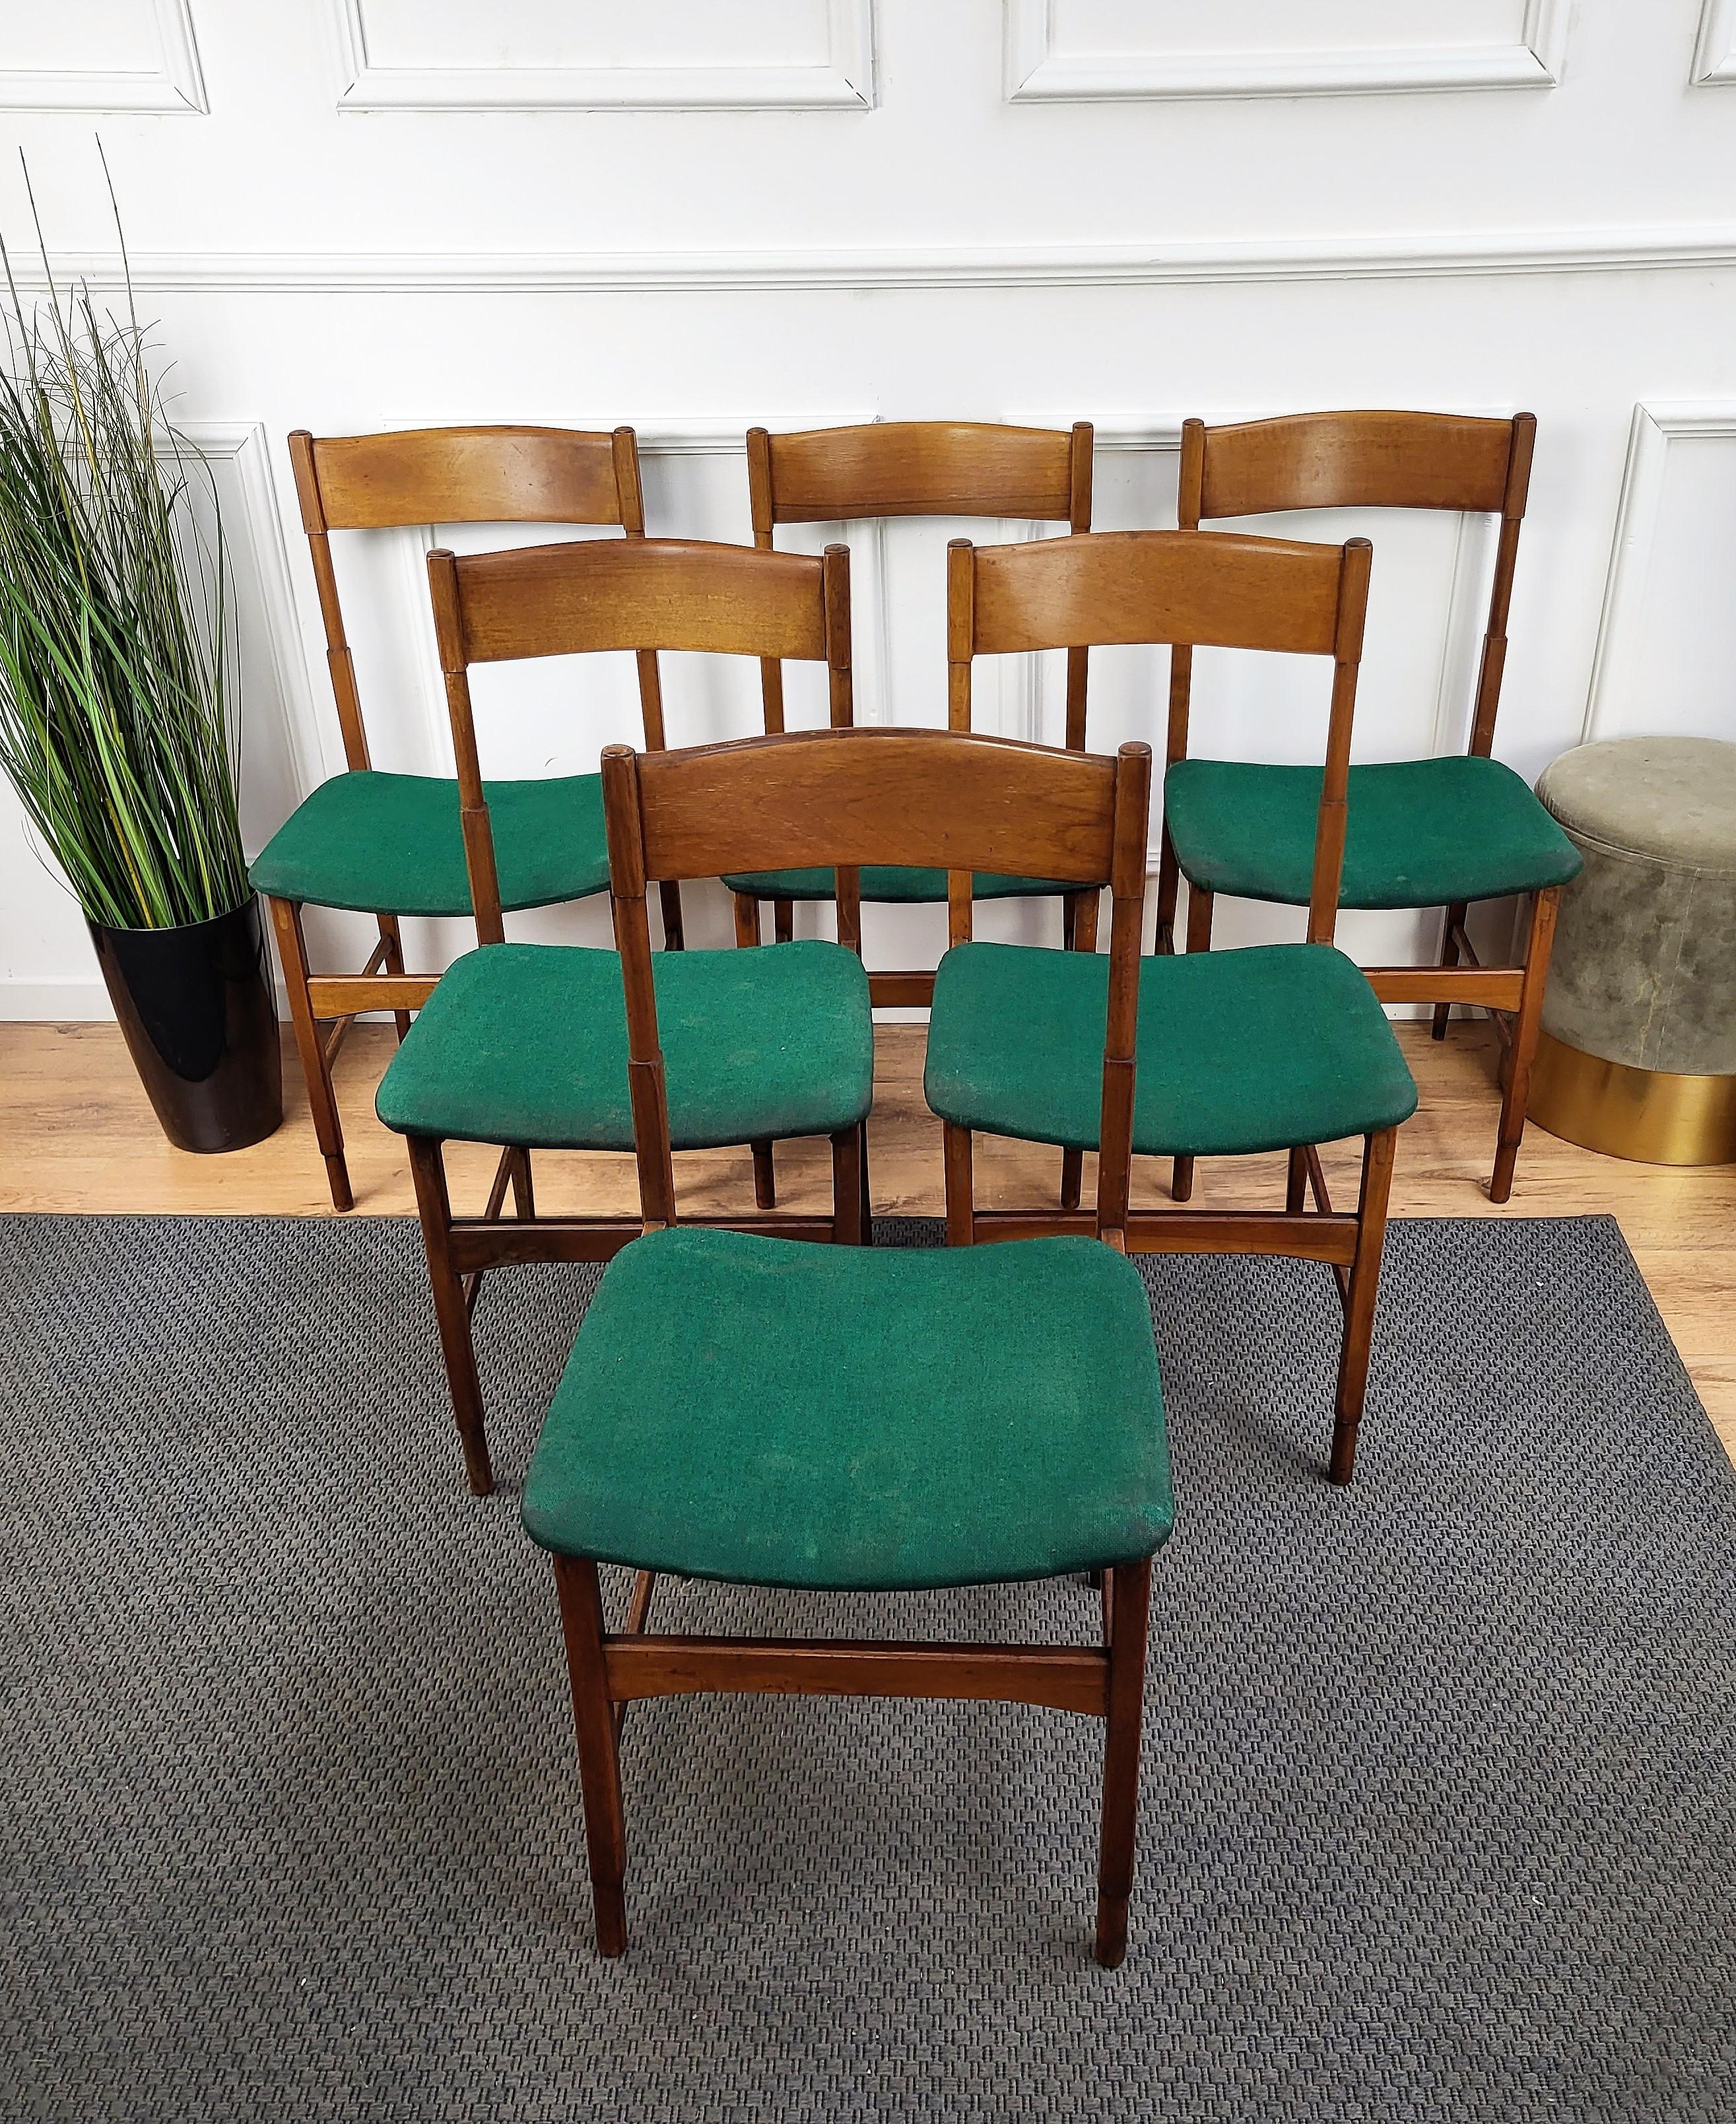 Beautiful and stylish Italian Mid-Century Modern set of 6 dining chairs, with greatly worked and shaped wooden structure and fabric upholstered seat. The unique and typical design, with the clean geometric shape and decoration enrich the natural